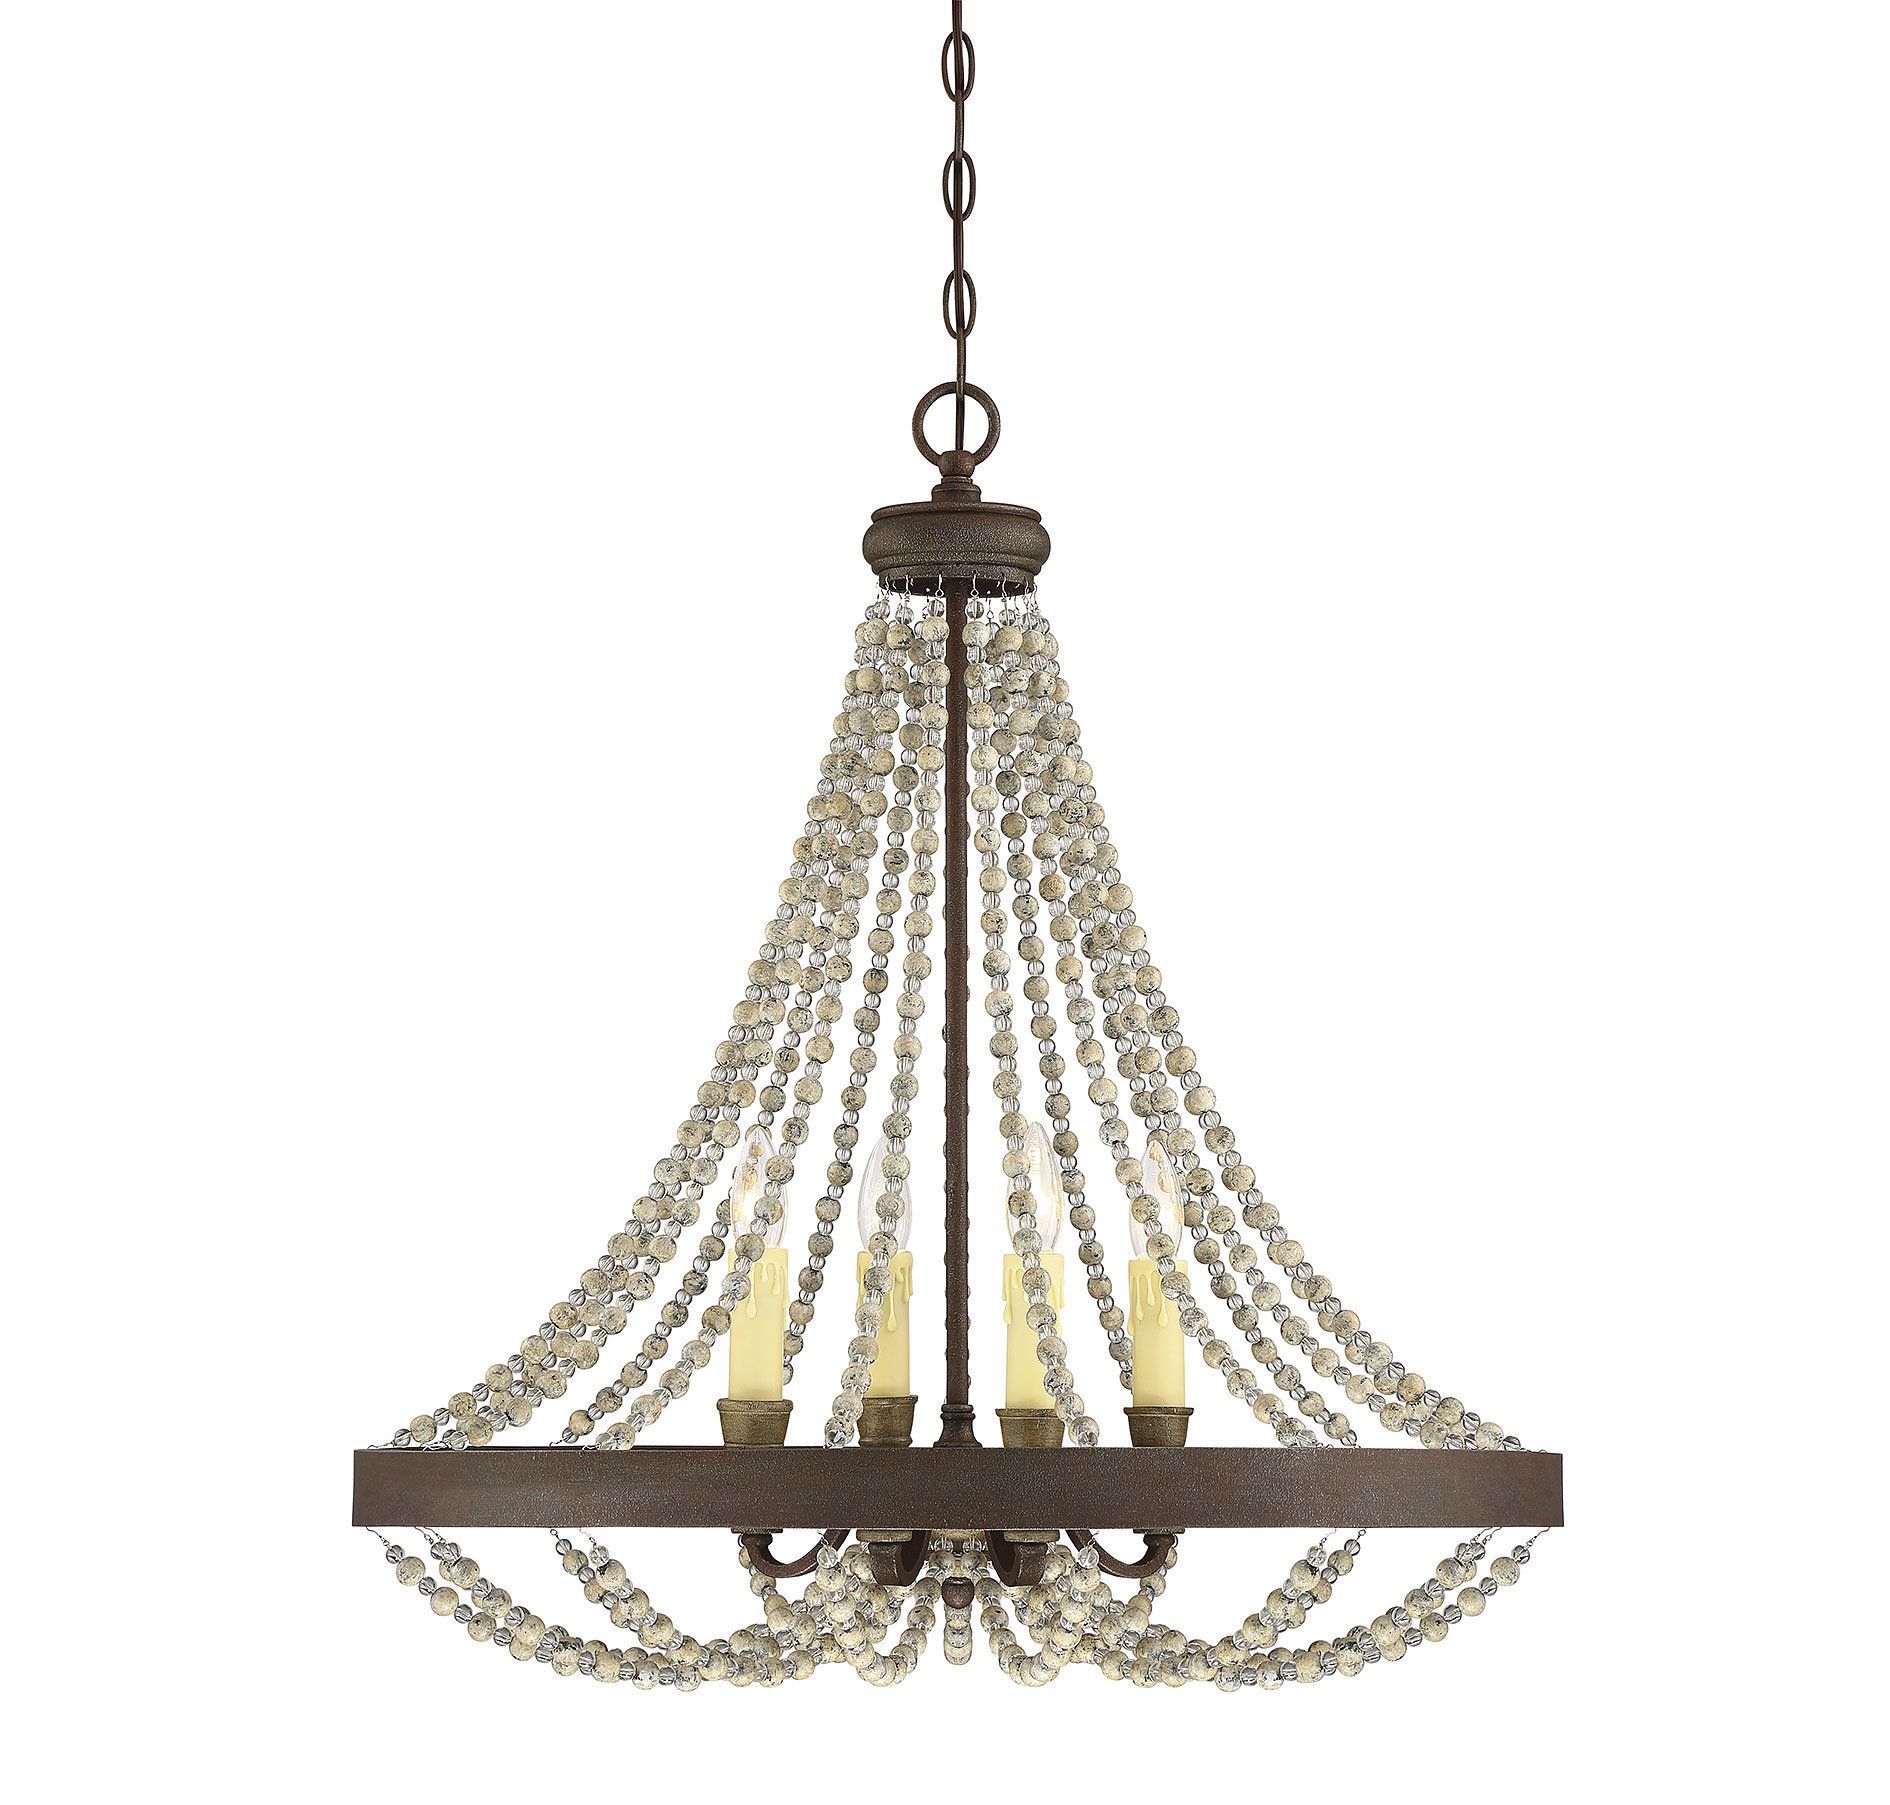 Artana 4 Light Candle Style Chandelier Within Whitten 4 Light Crystal Chandeliers (View 7 of 30)